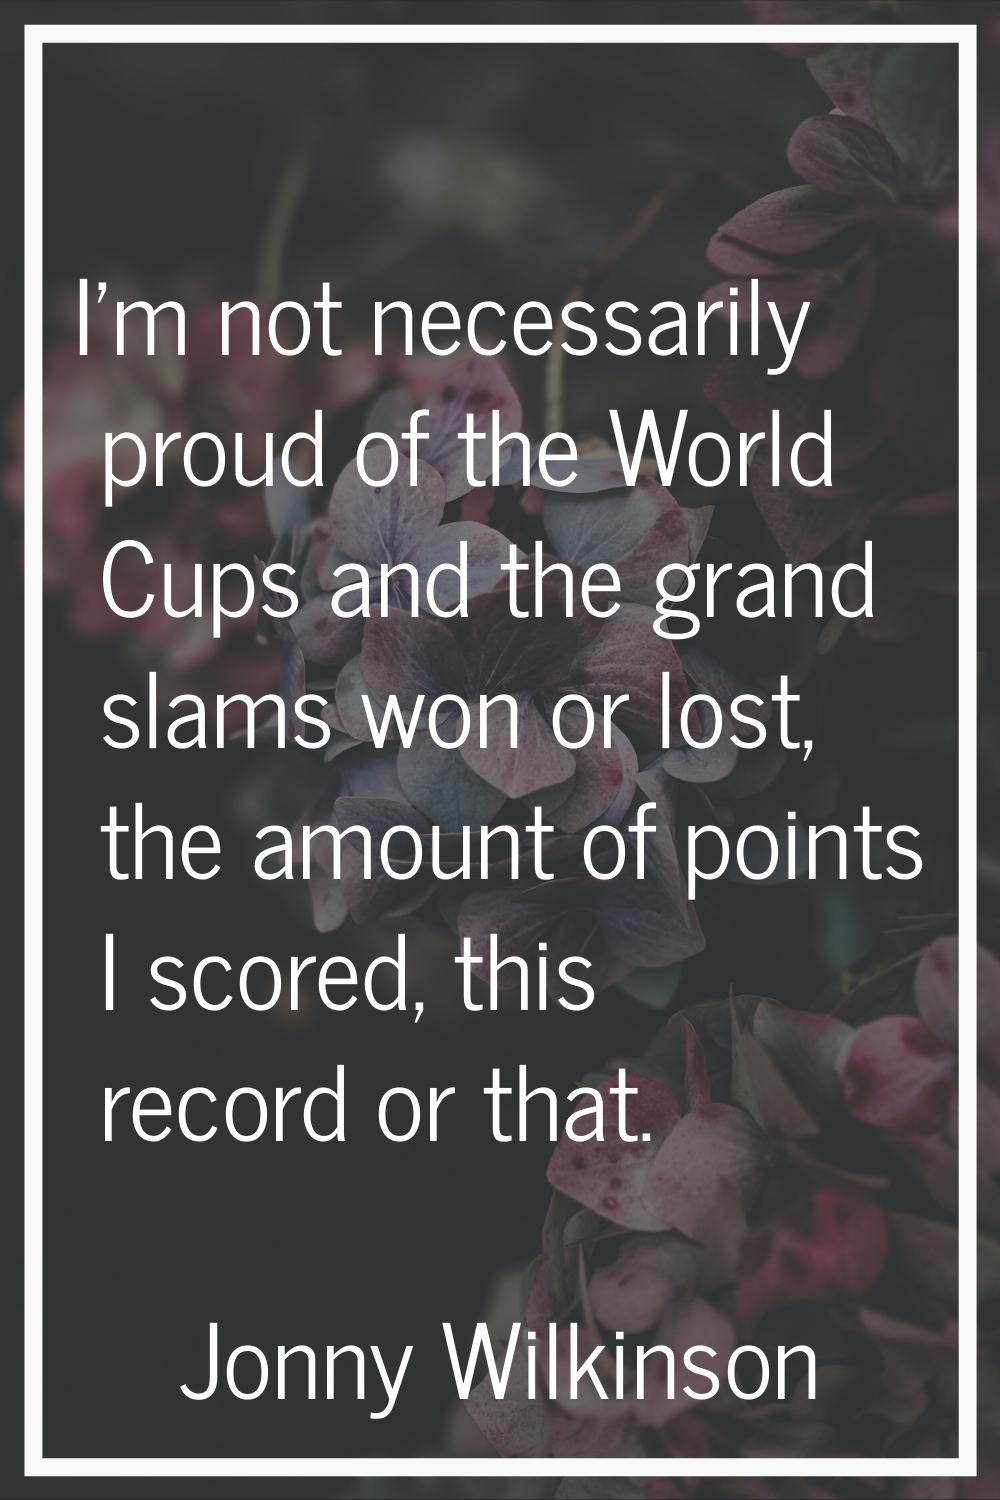 I'm not necessarily proud of the World Cups and the grand slams won or lost, the amount of points I